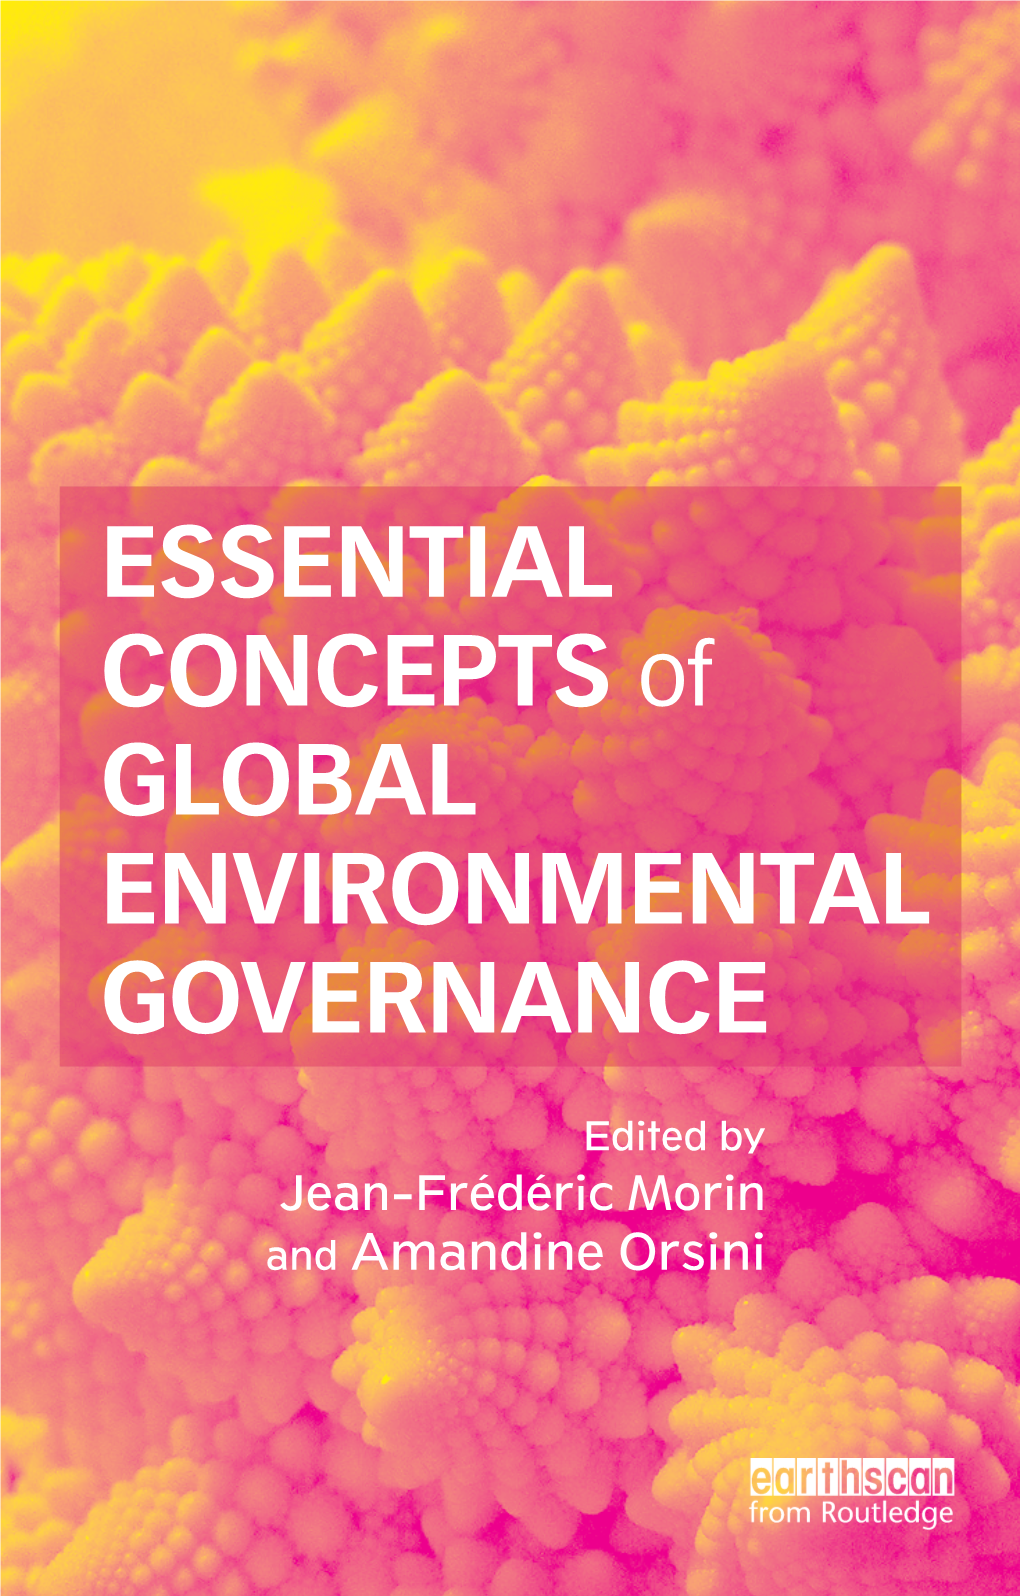 ESSENTIAL CONCEPTS of GLOBAL ENVIRONMENTAL GOVERNANCE